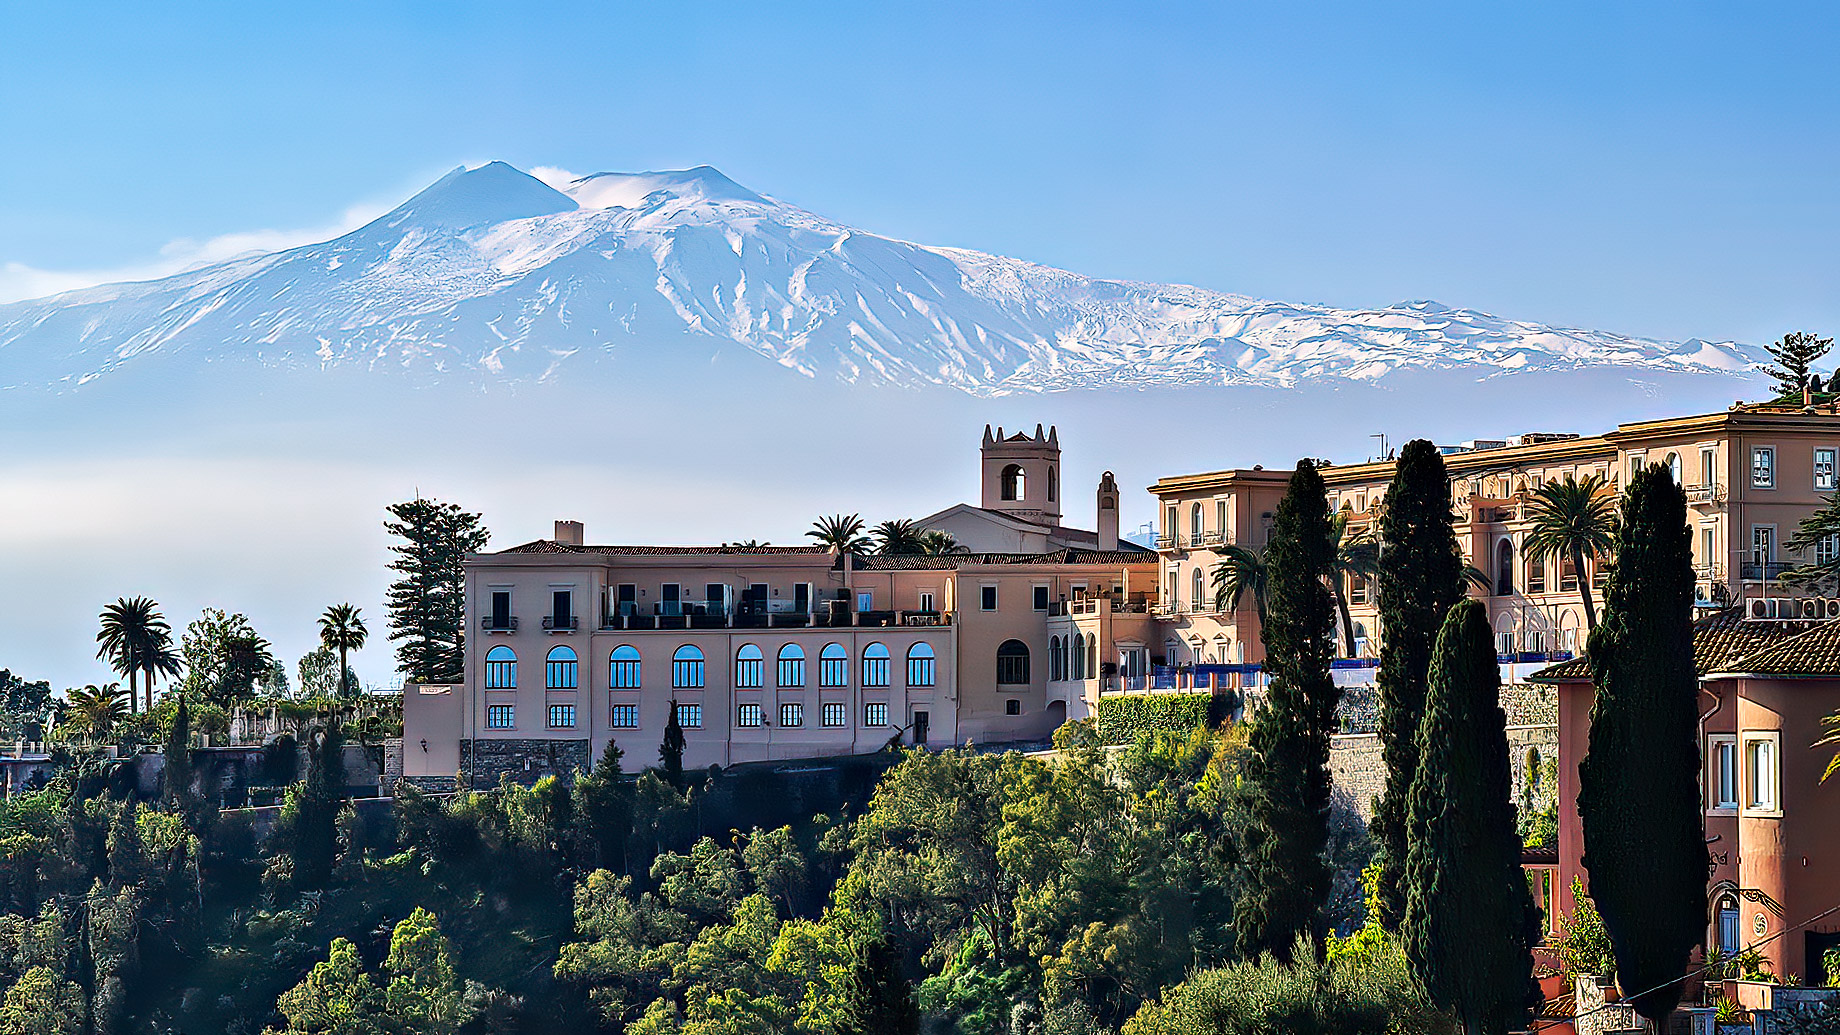 Luxury San Domenico Palace Hotel with panoramic view on snow capped Mount Etna